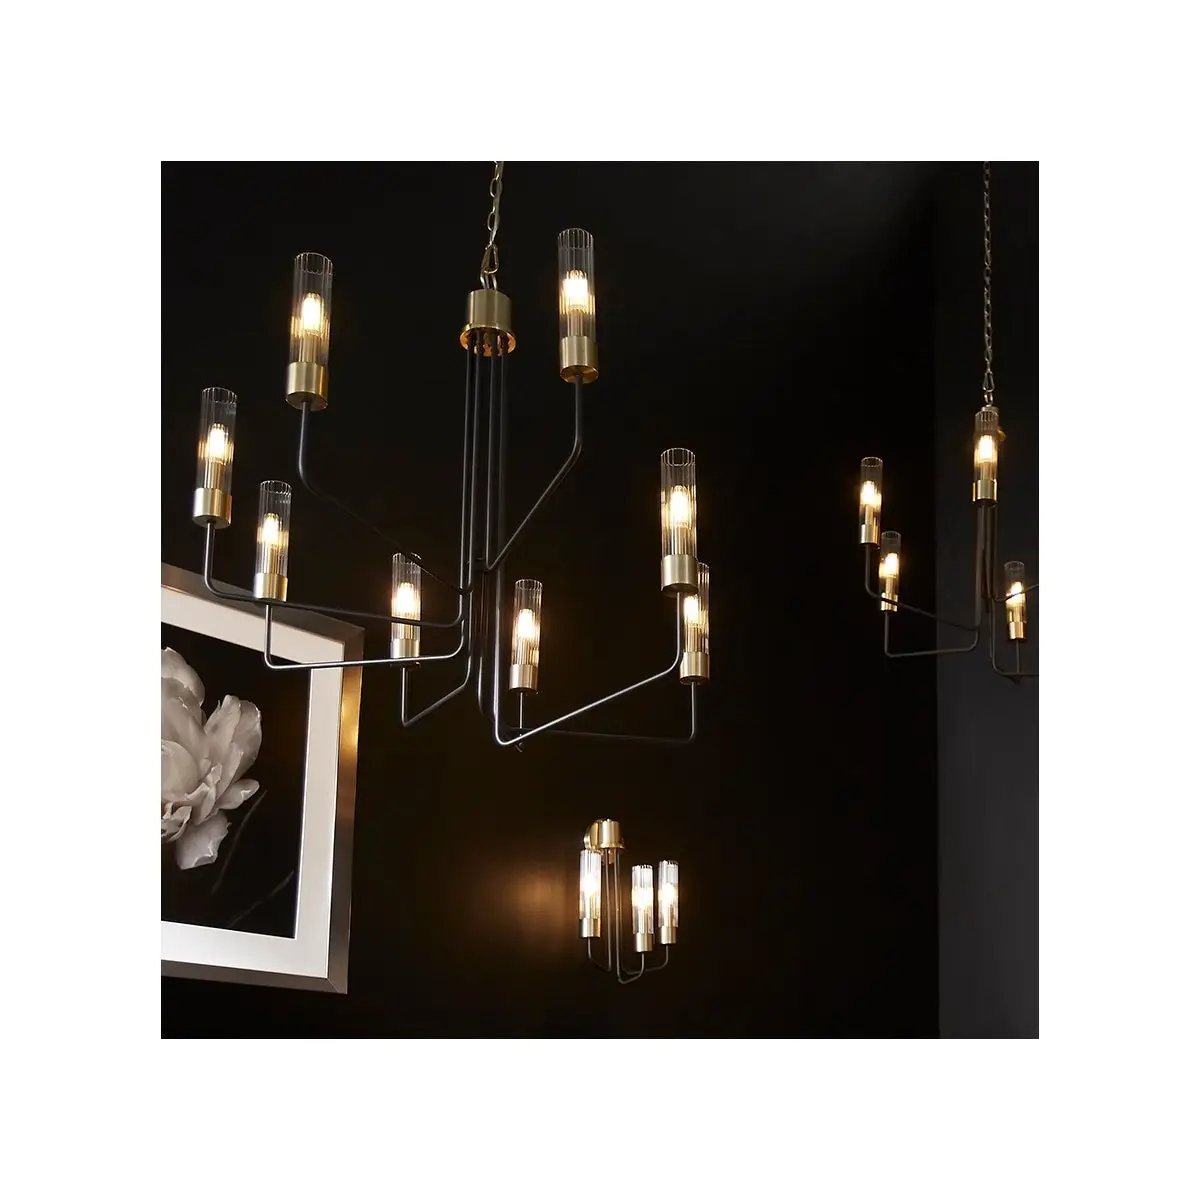 Transitional chandelier with minimalist design, aged brass and noir finish, and clear fluted glass shades. Perfect for mid-century modern spaces.